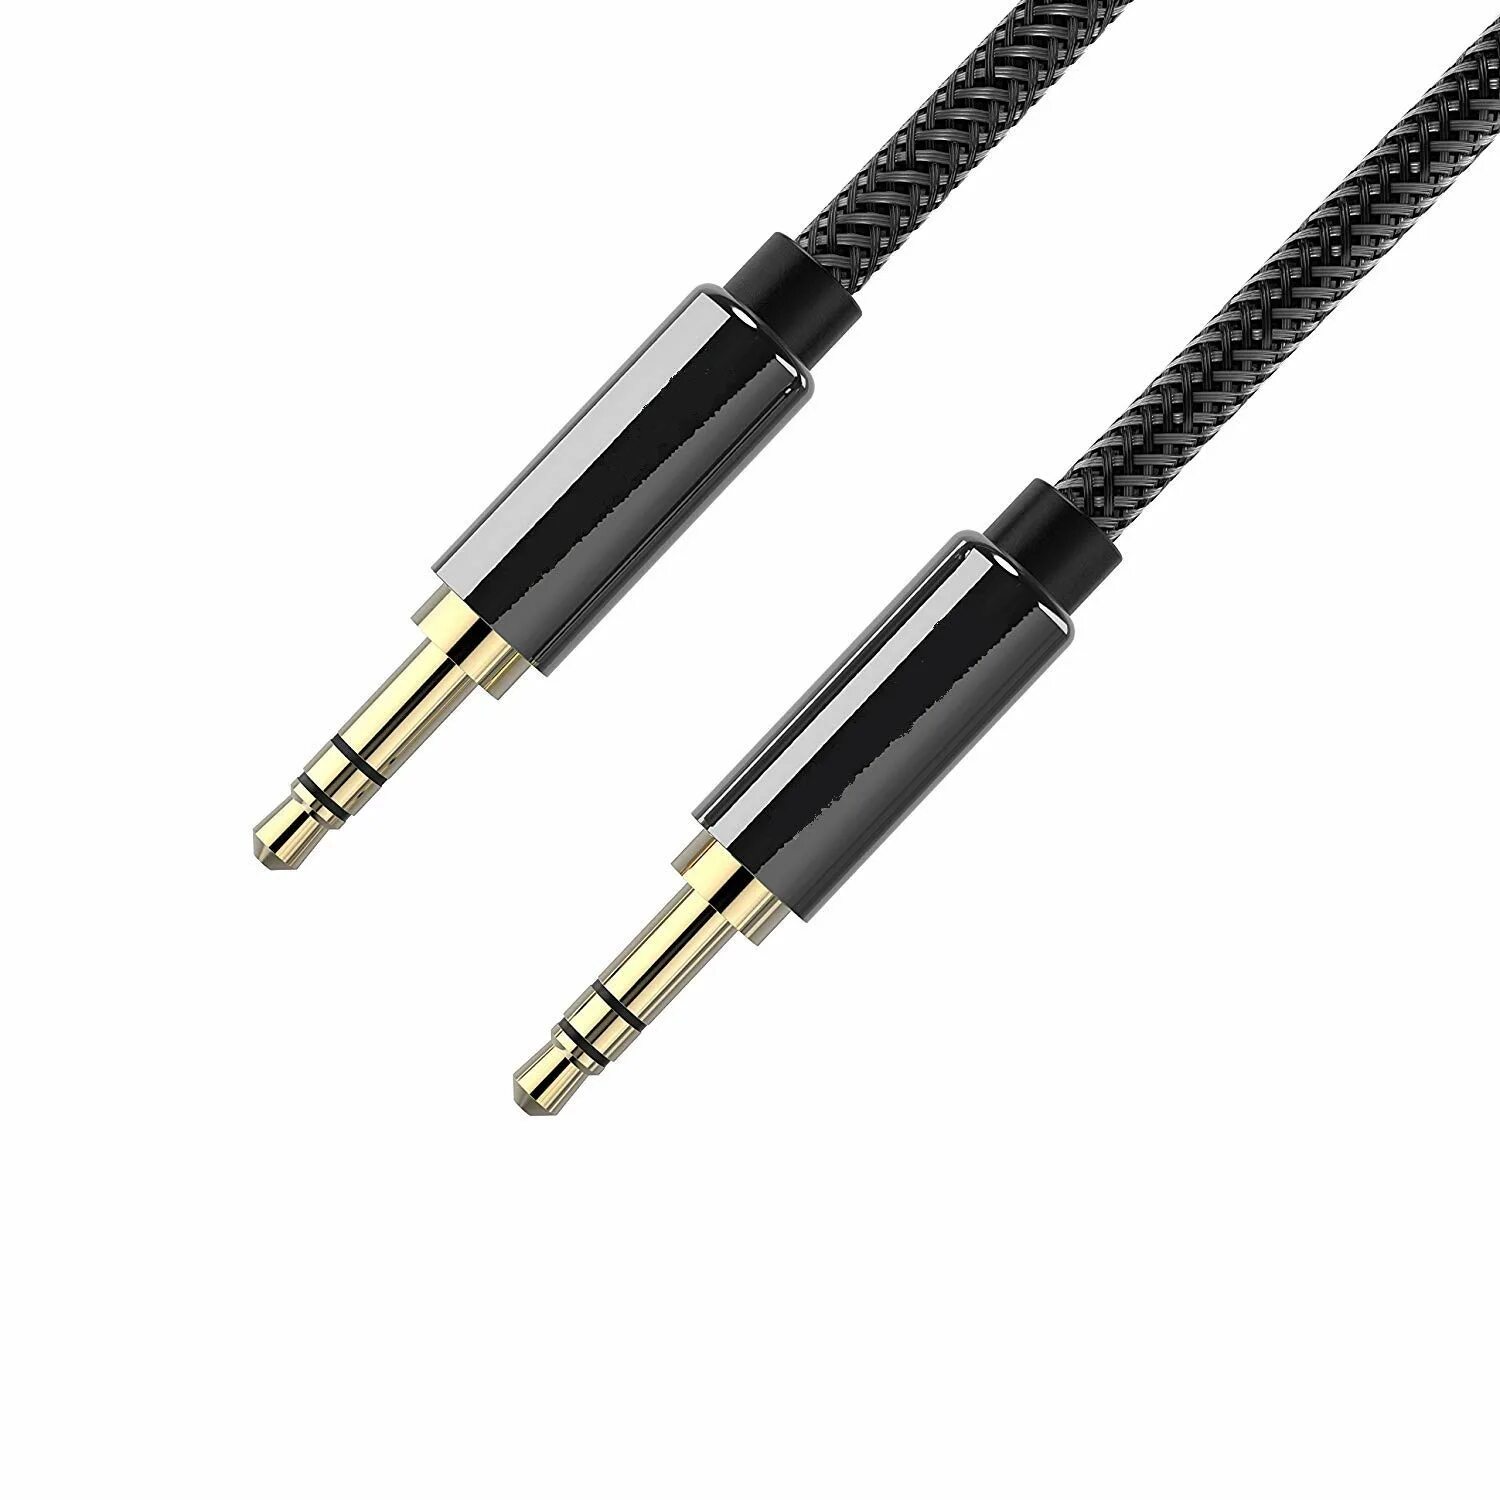 Кабель 3 1 5 мм. GZPASK aux Cable 1000mm ax13. Кабель aux 3.5-3.5 Hoco upa16. Кабель aux ACV aux ac12-3511b. Aux 3.5 Audio Cable f/m soloffer "solo-l18" 1000mm.